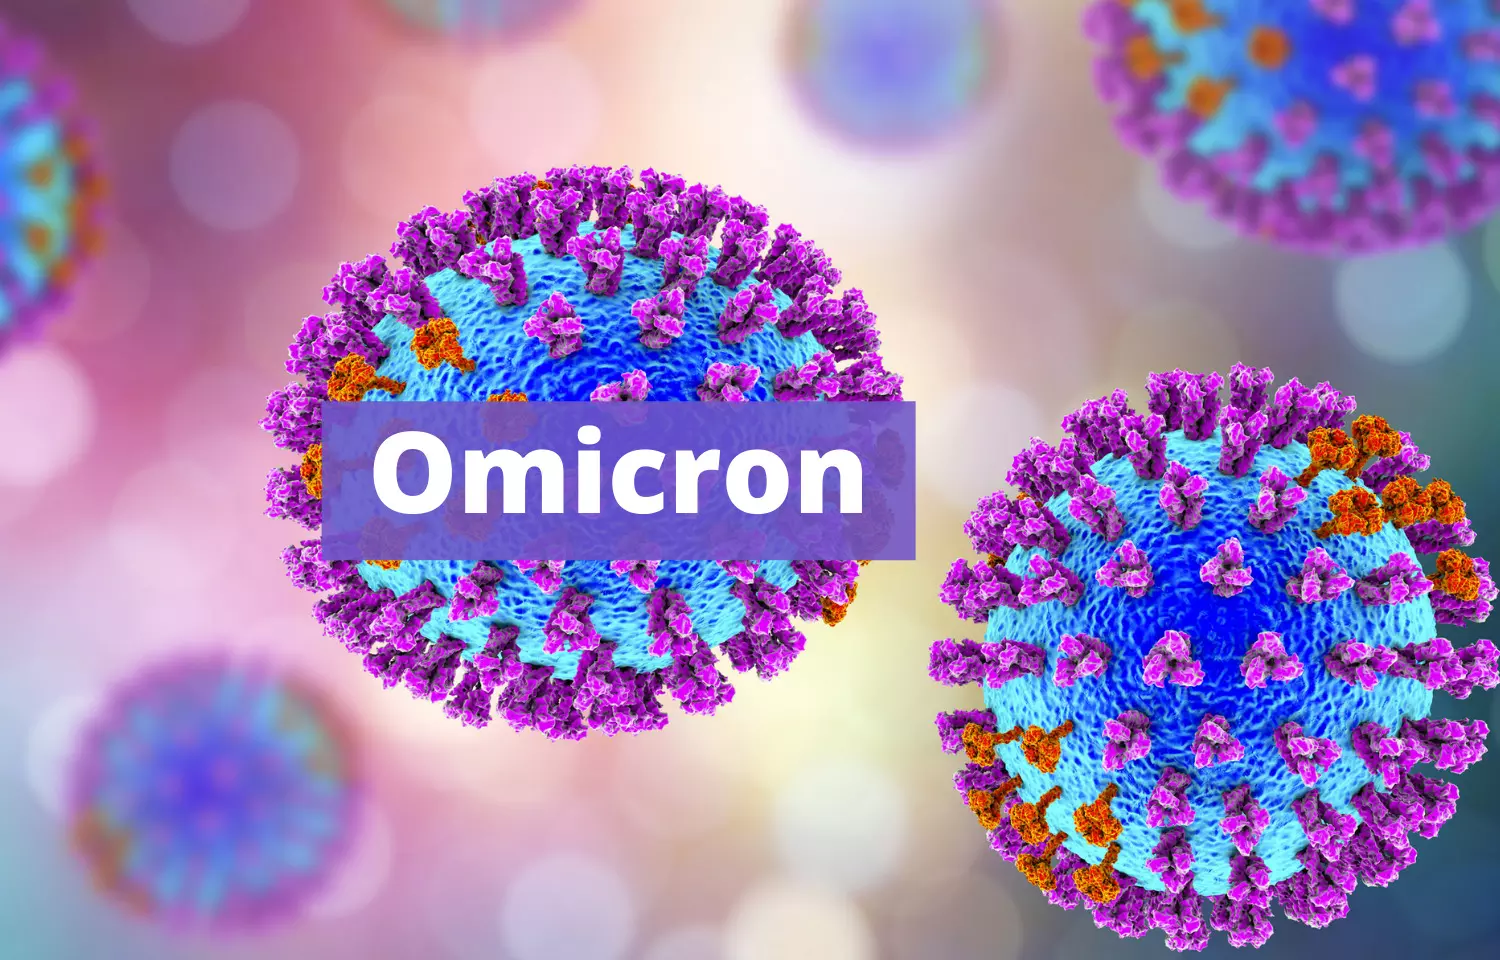 200 cases of Omicron in India so far: Union Health Ministry